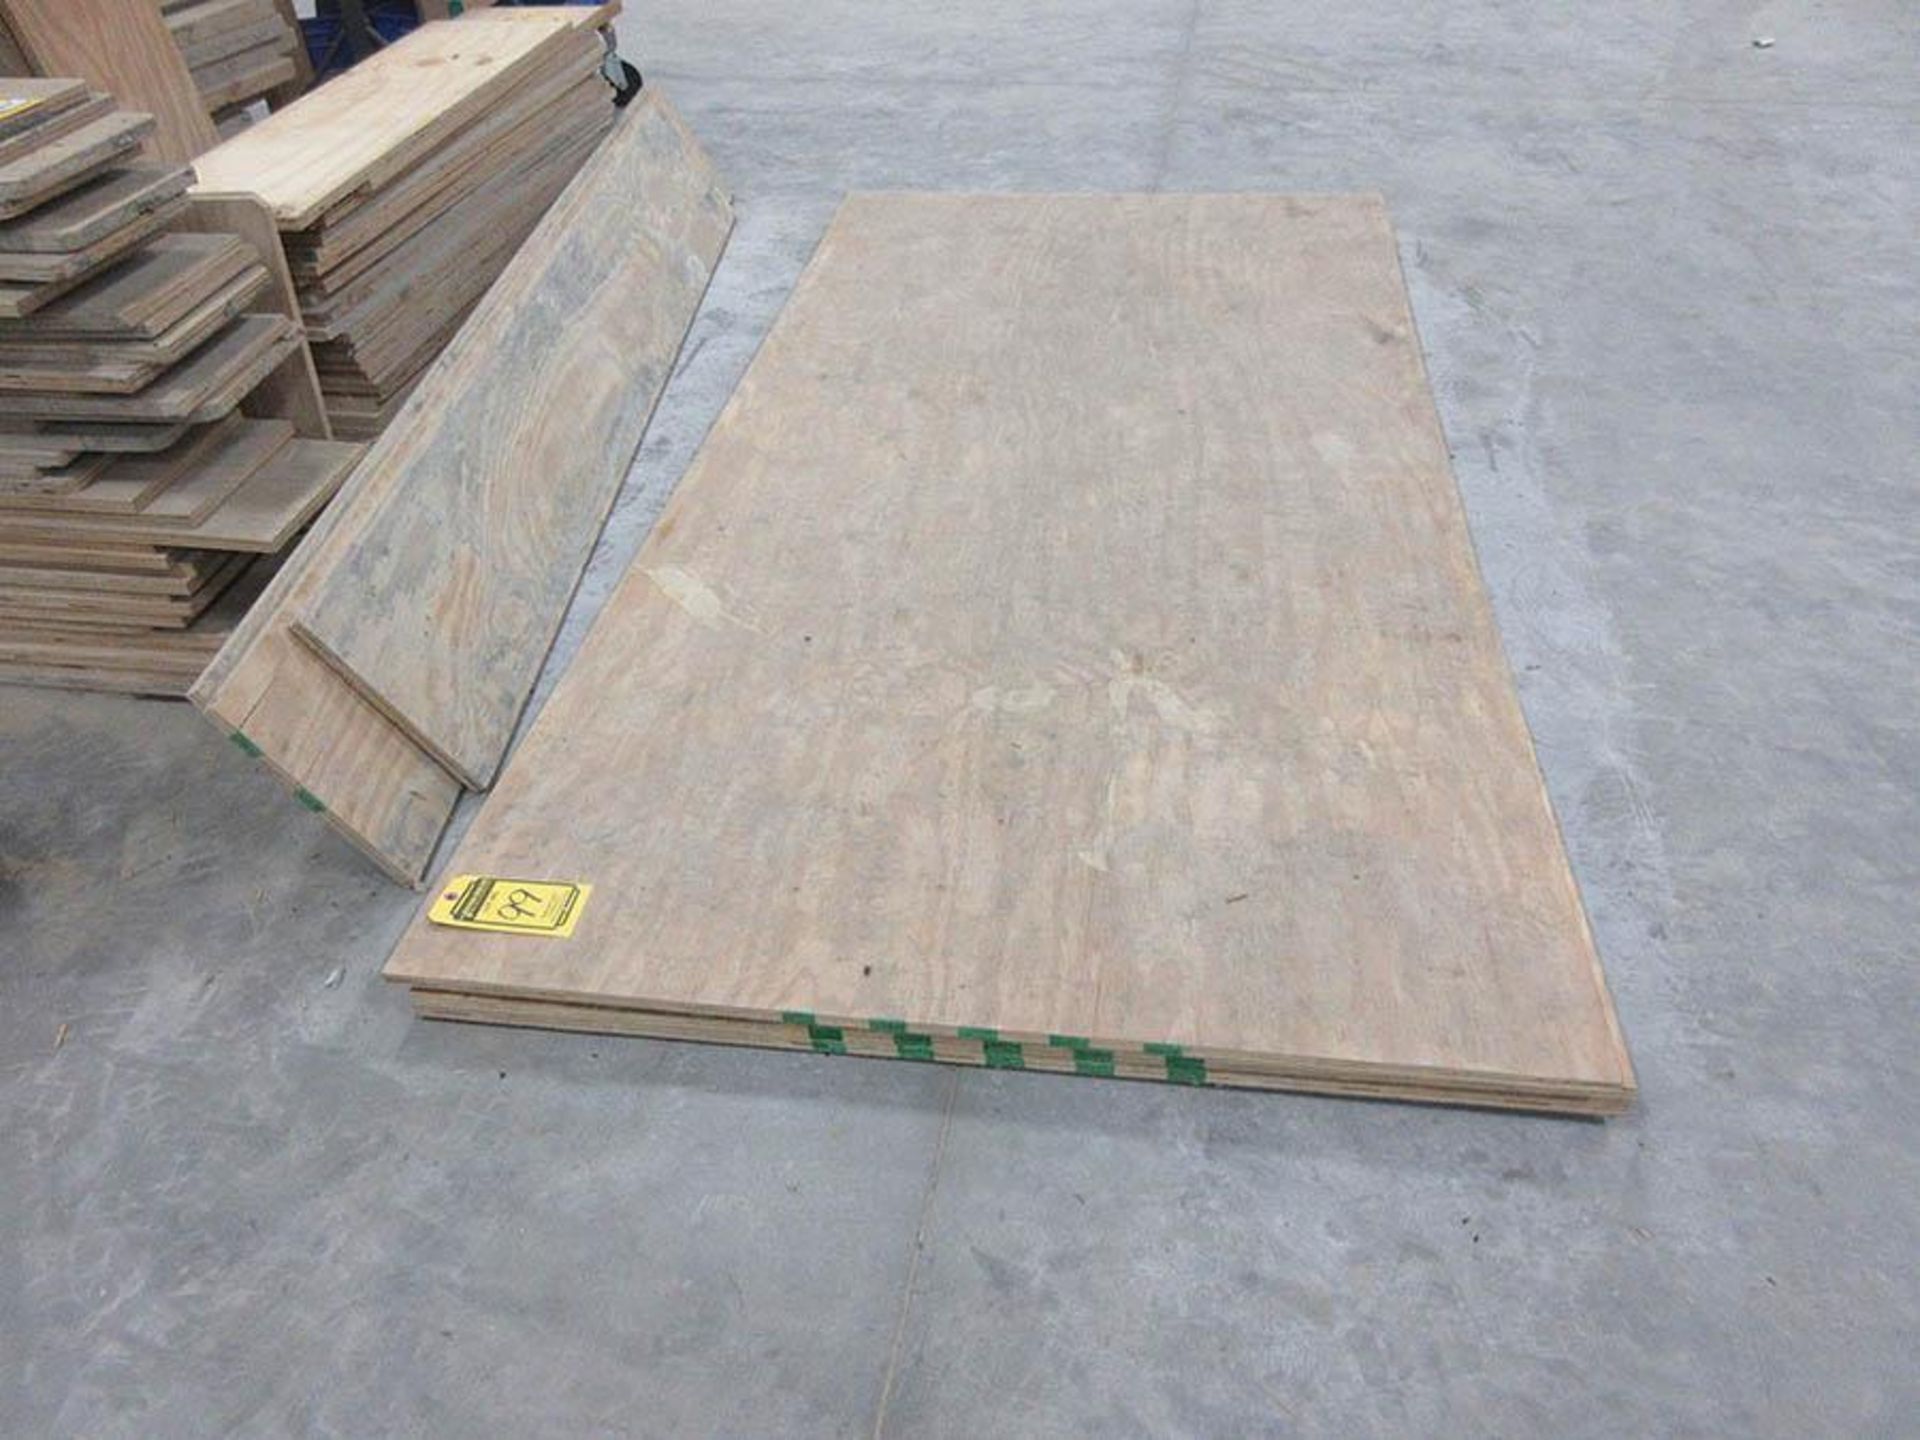 PLYWOOD & TRIM BOARD (ULINE CART NOT INCLUDED)